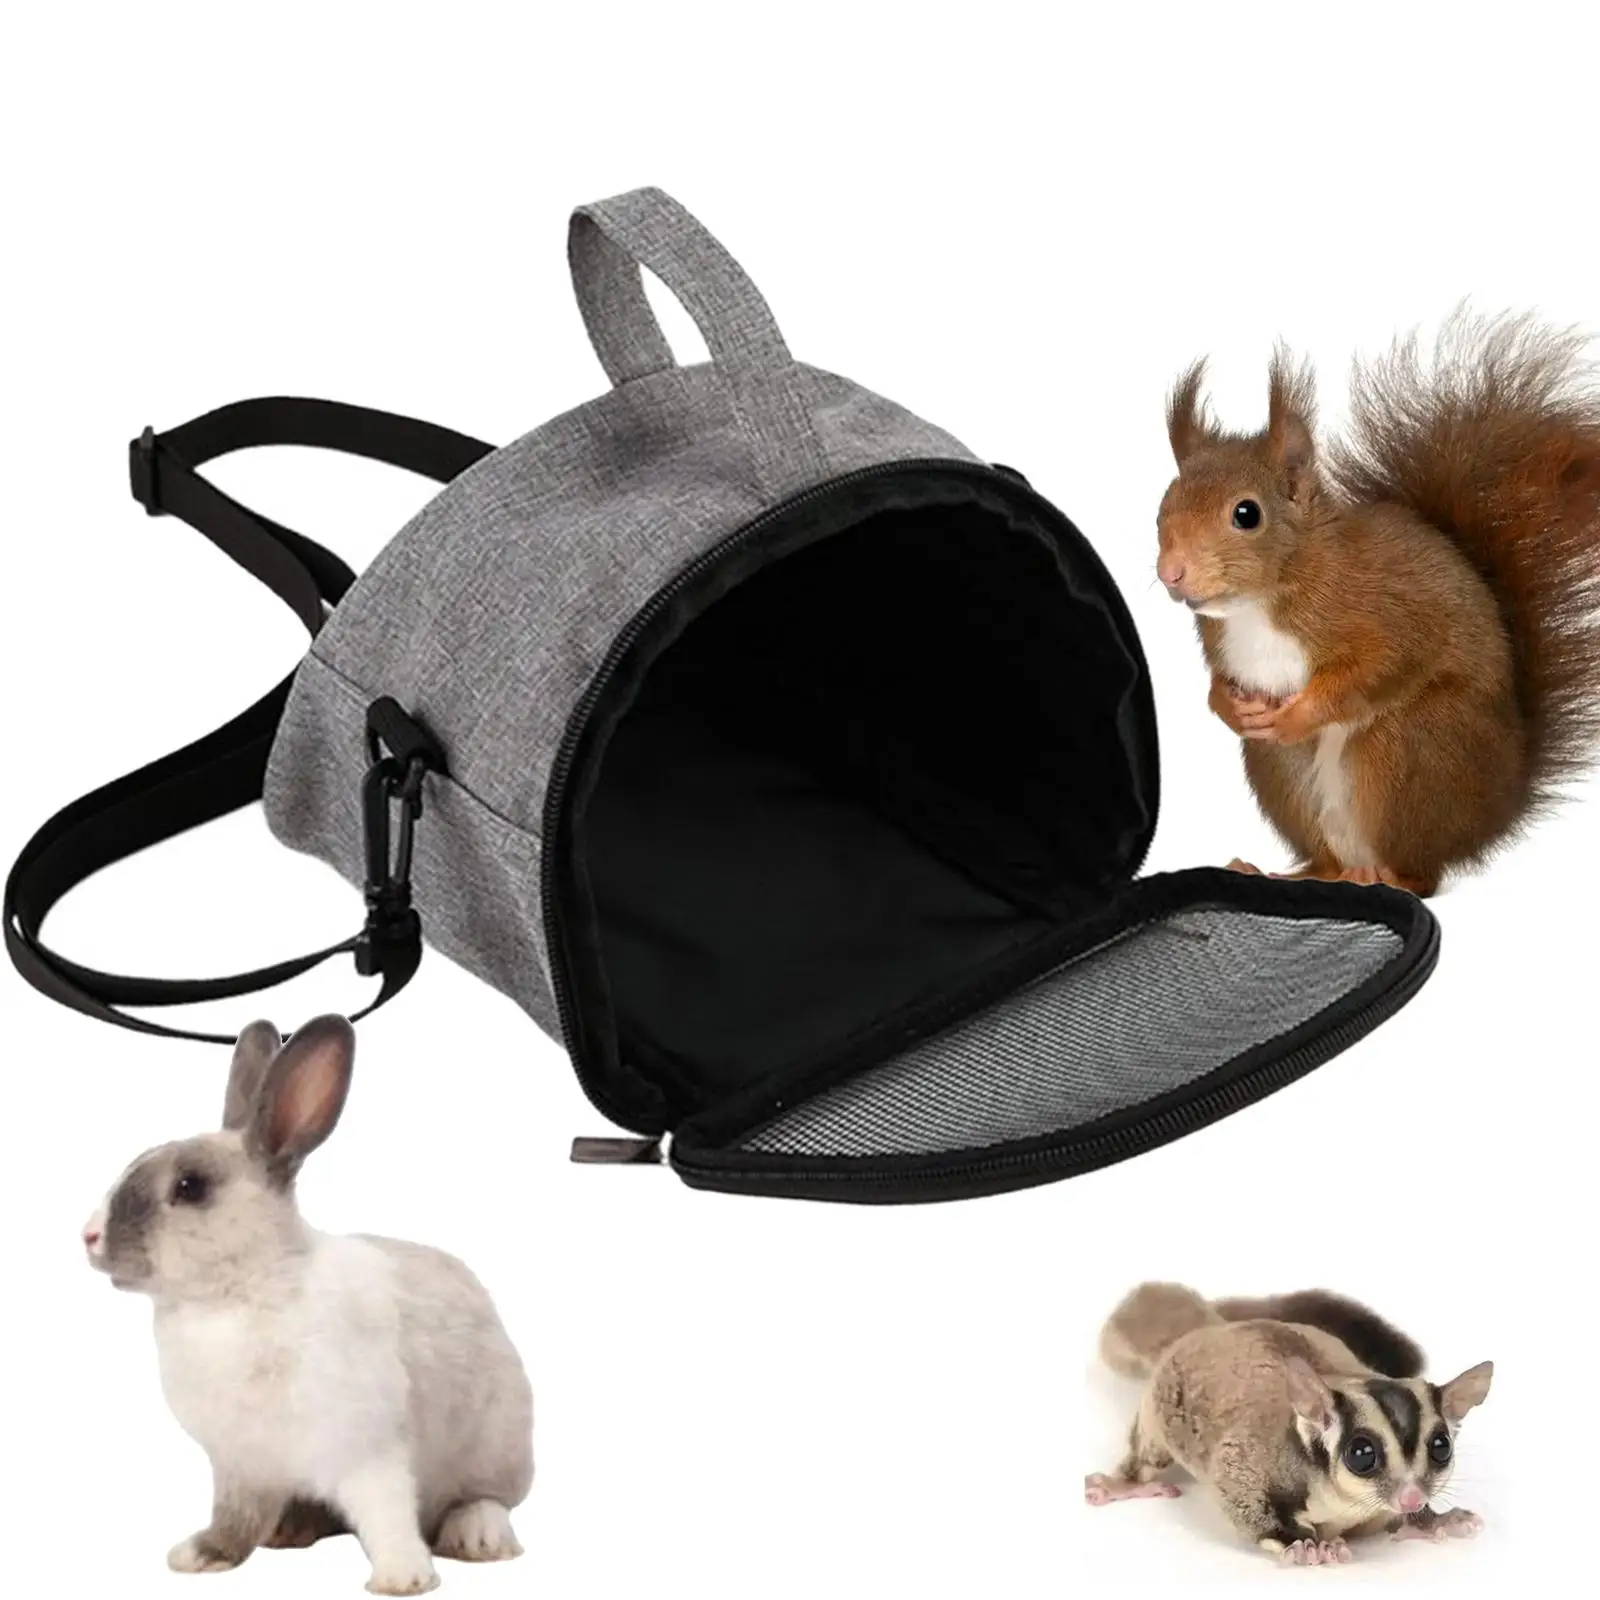 Hamster Carrier Small Pet Supplies Guinea Pig Travel Transport Bag Easy Carrying Zipper Outdoor Tote Pouch for Outdoor Hiking